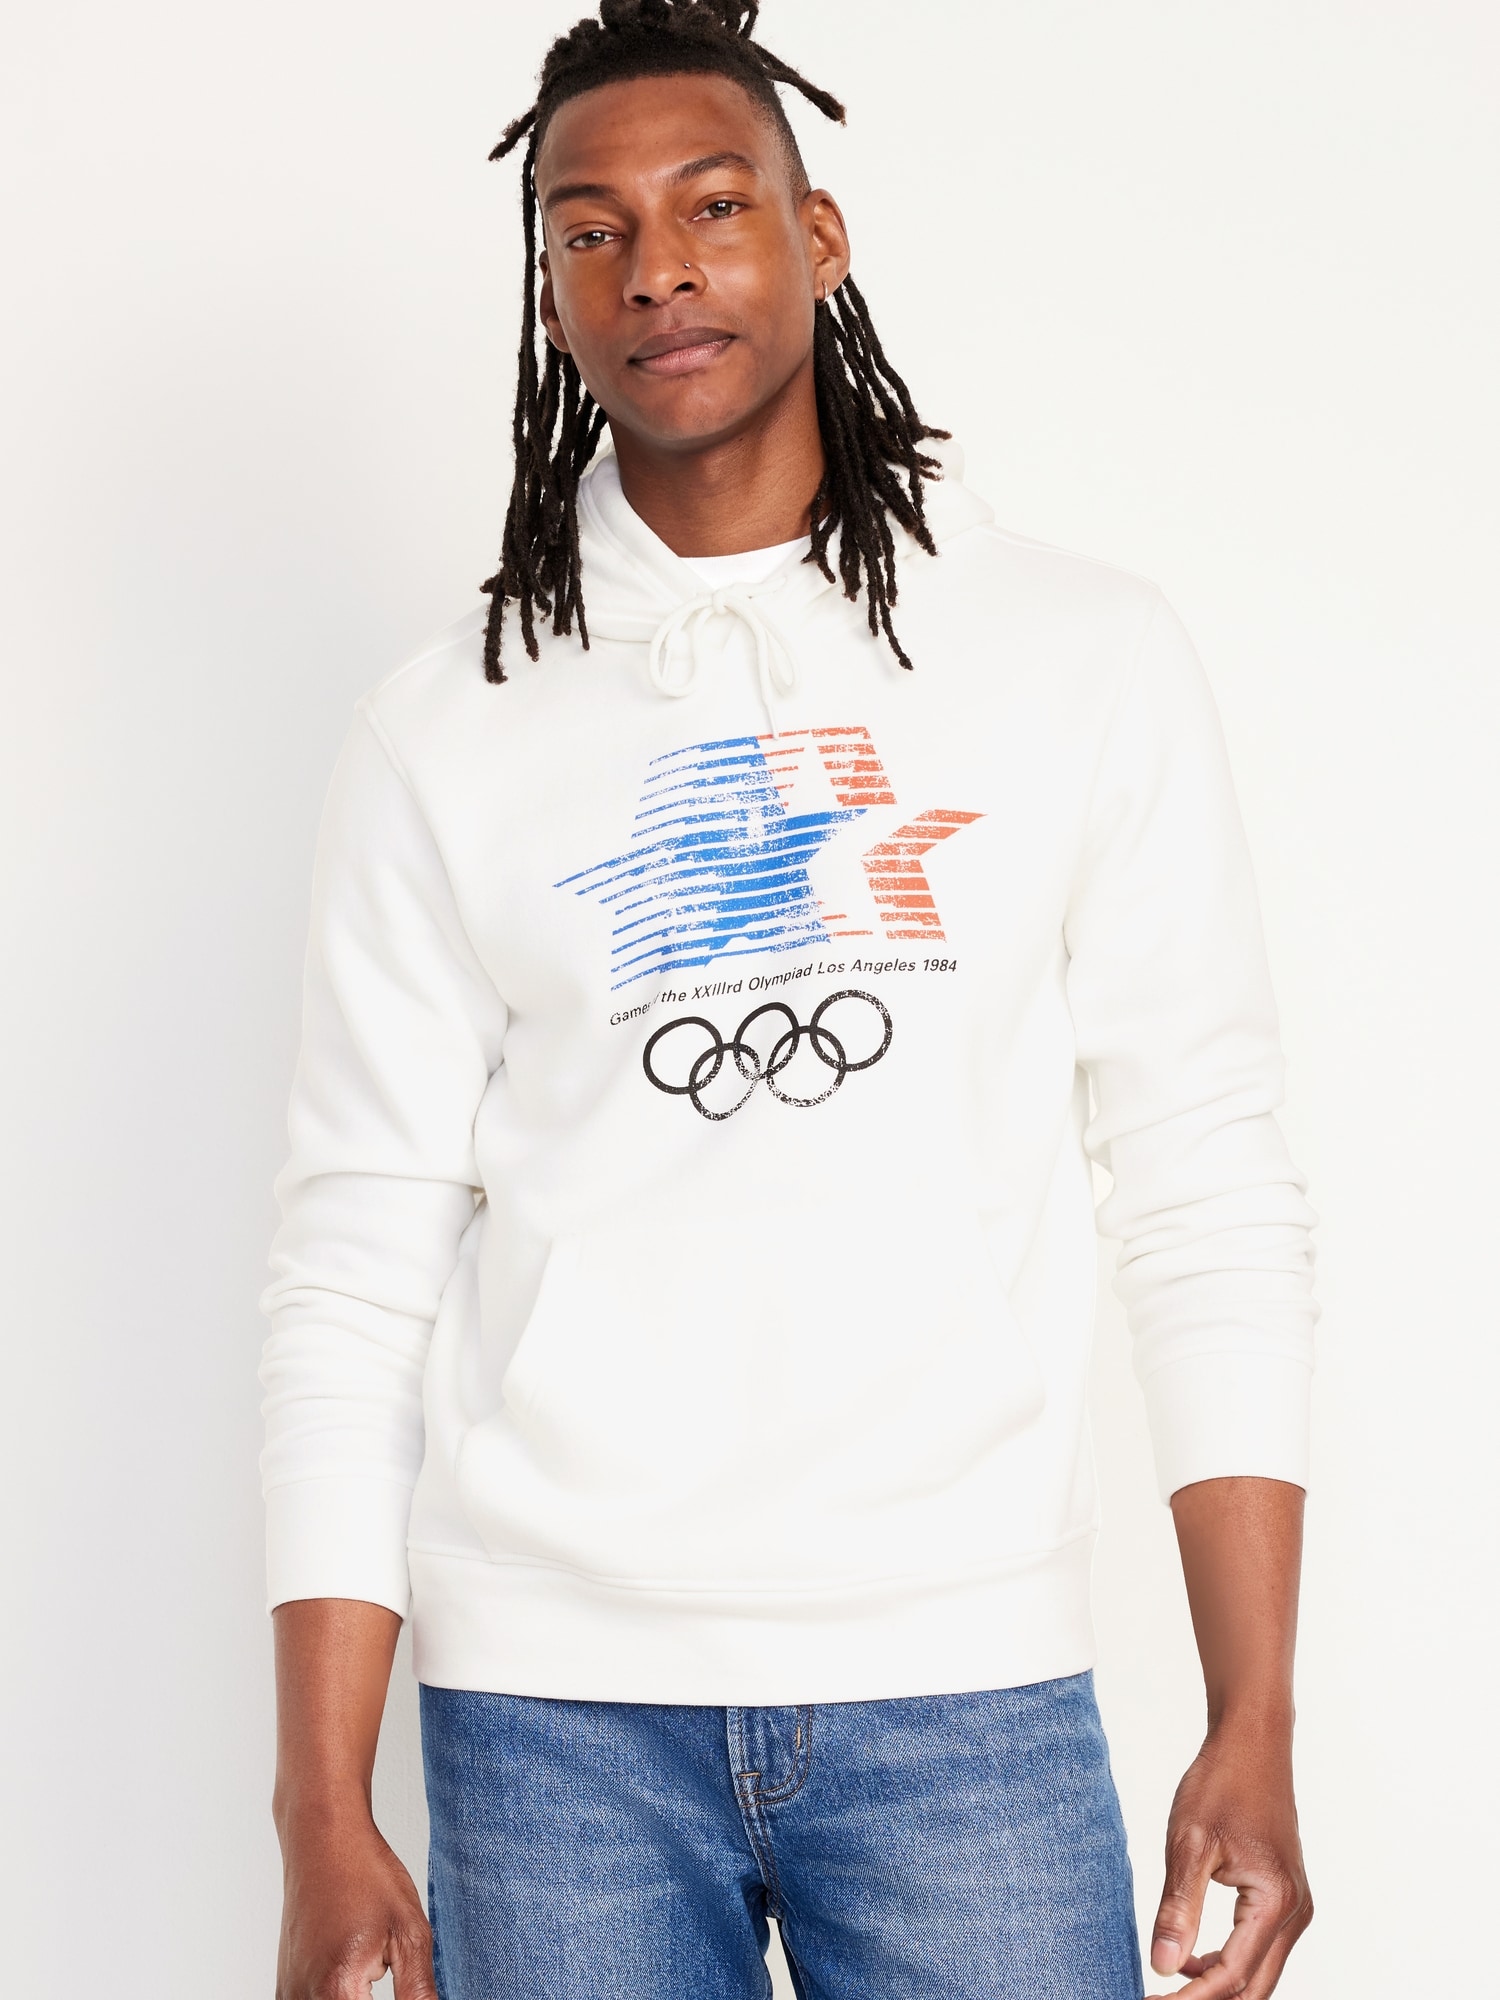 Team USAⓒ Gender-Neutral Pullover Hoodie for Adults